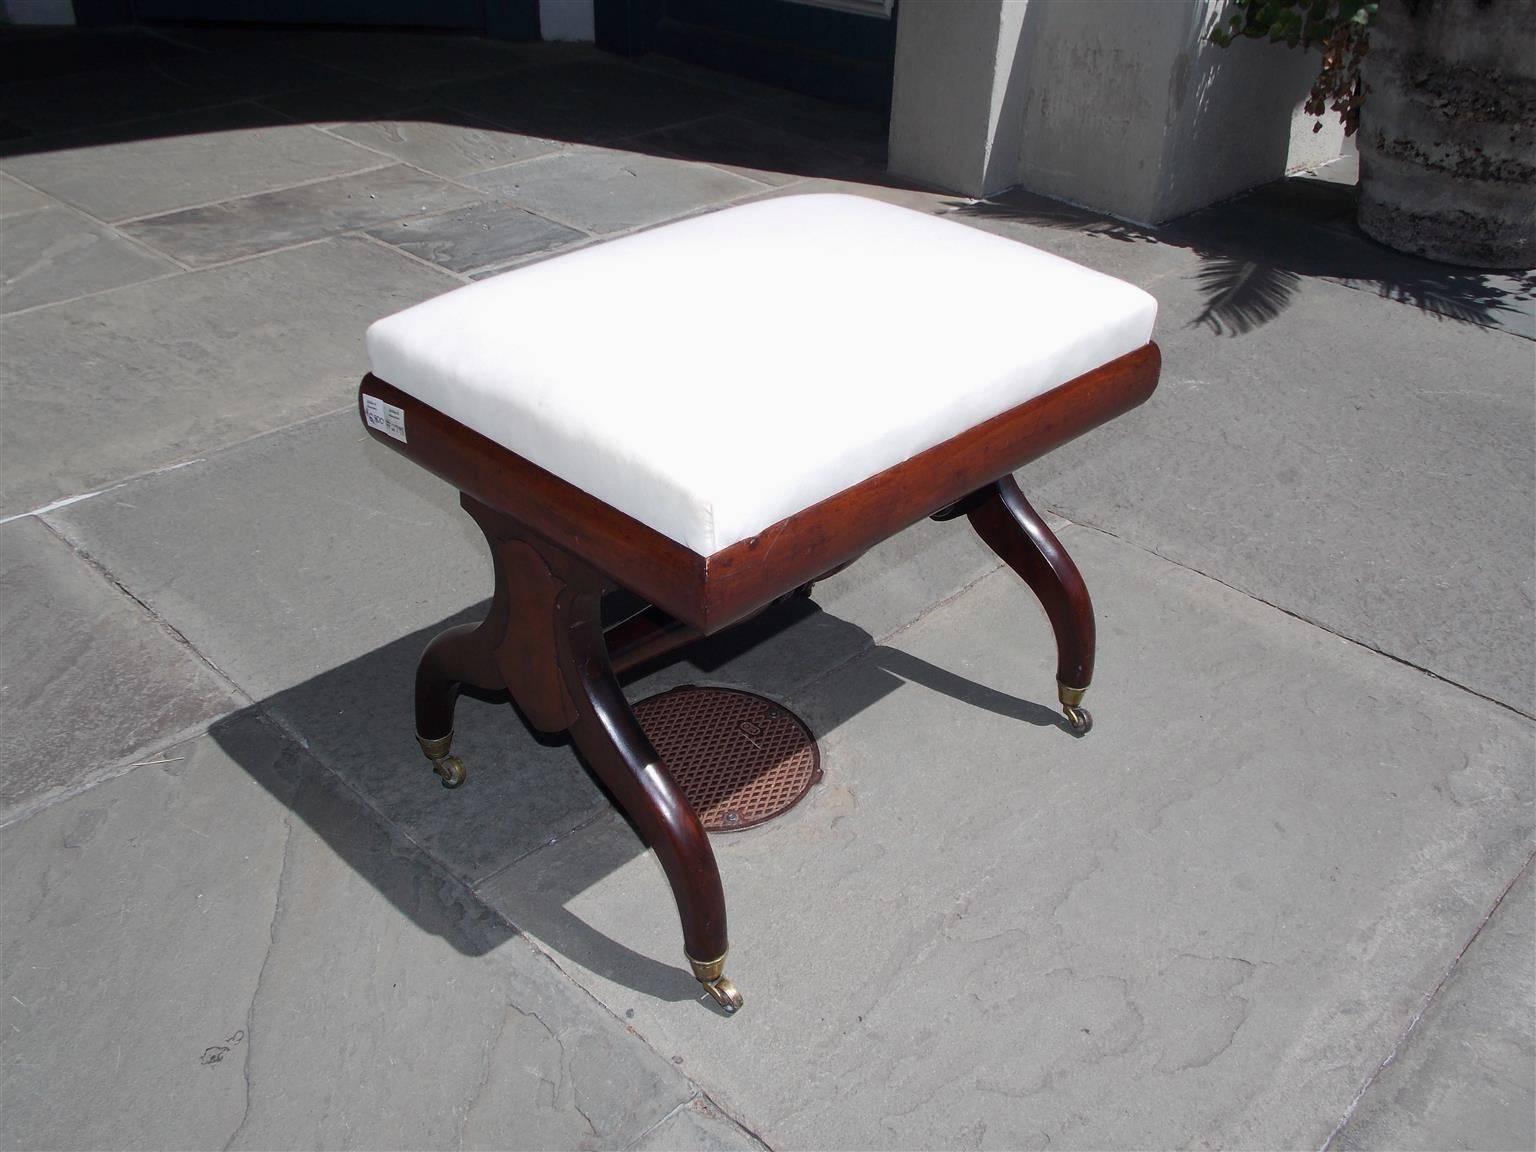 Hand-Carved English Regency Mahogany Upholstered Stool on Brass Casters, Circa 1815